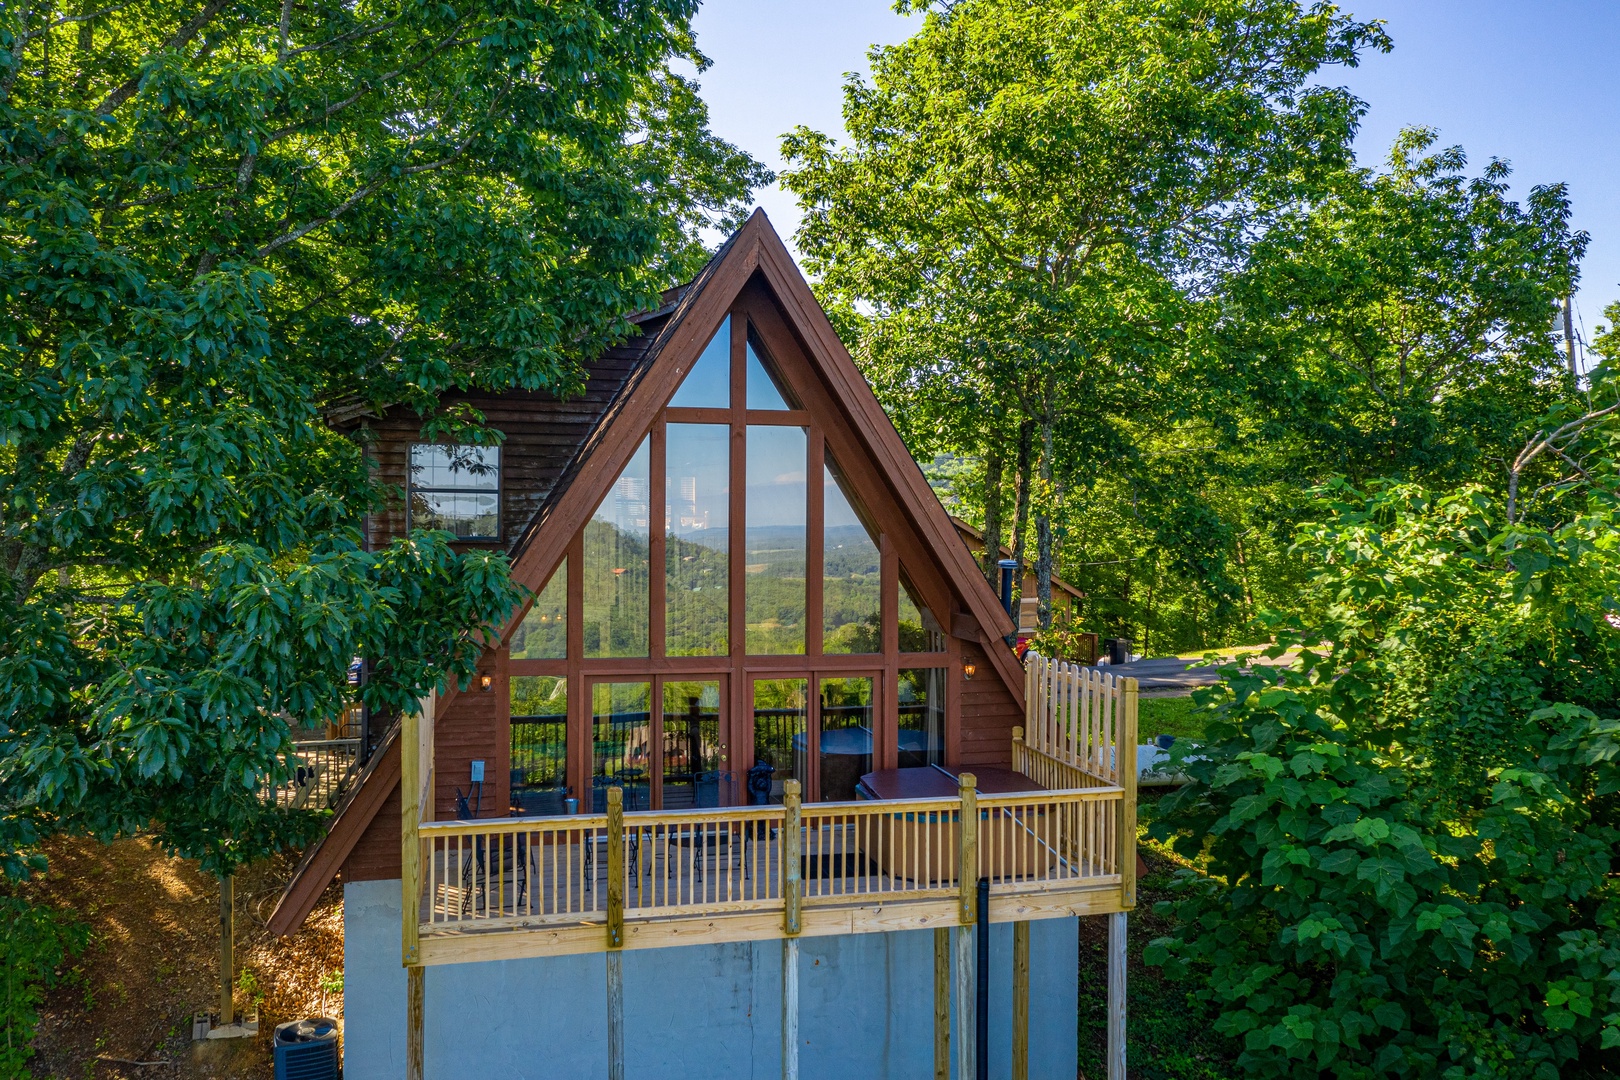 Exterior deck view at Cozy Mountain View, a 1 bedroom cabin rental located in Pigeon Forge